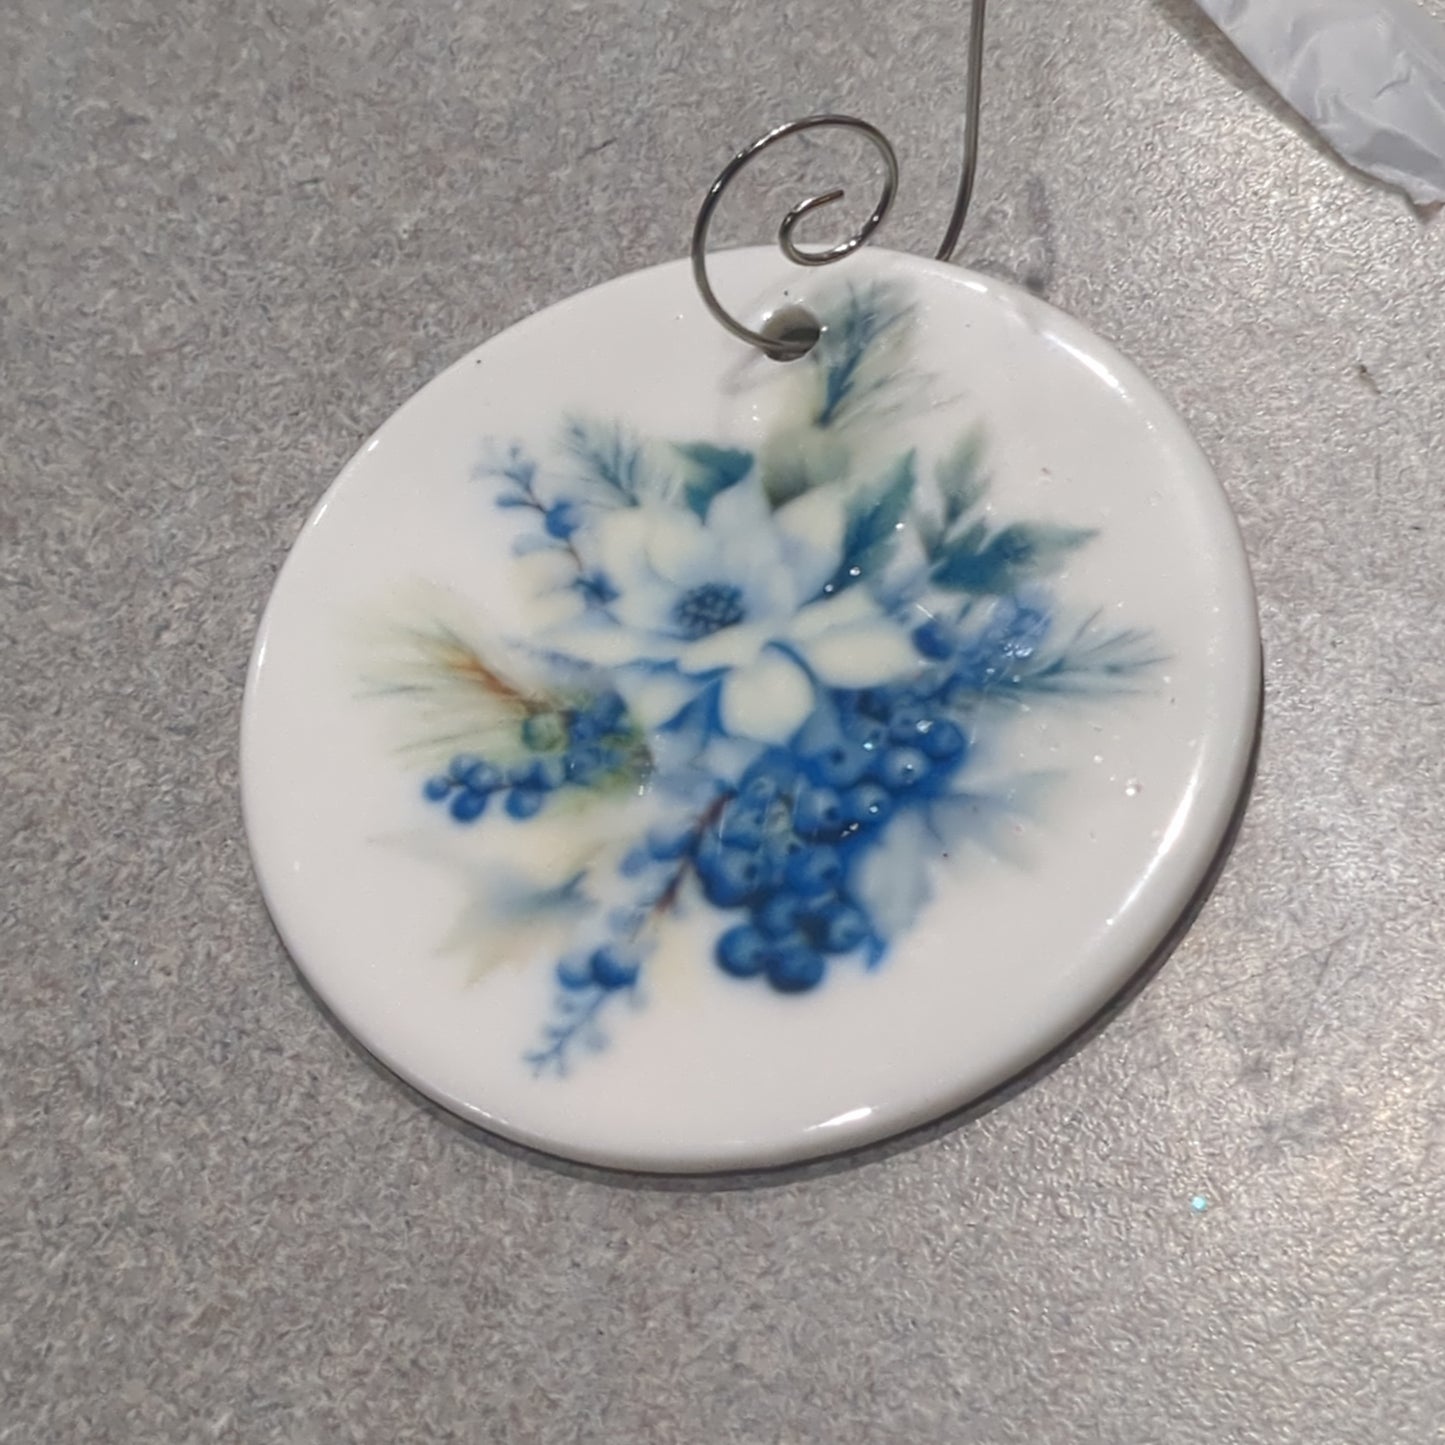 Ceramic ornament flowers and blue berries